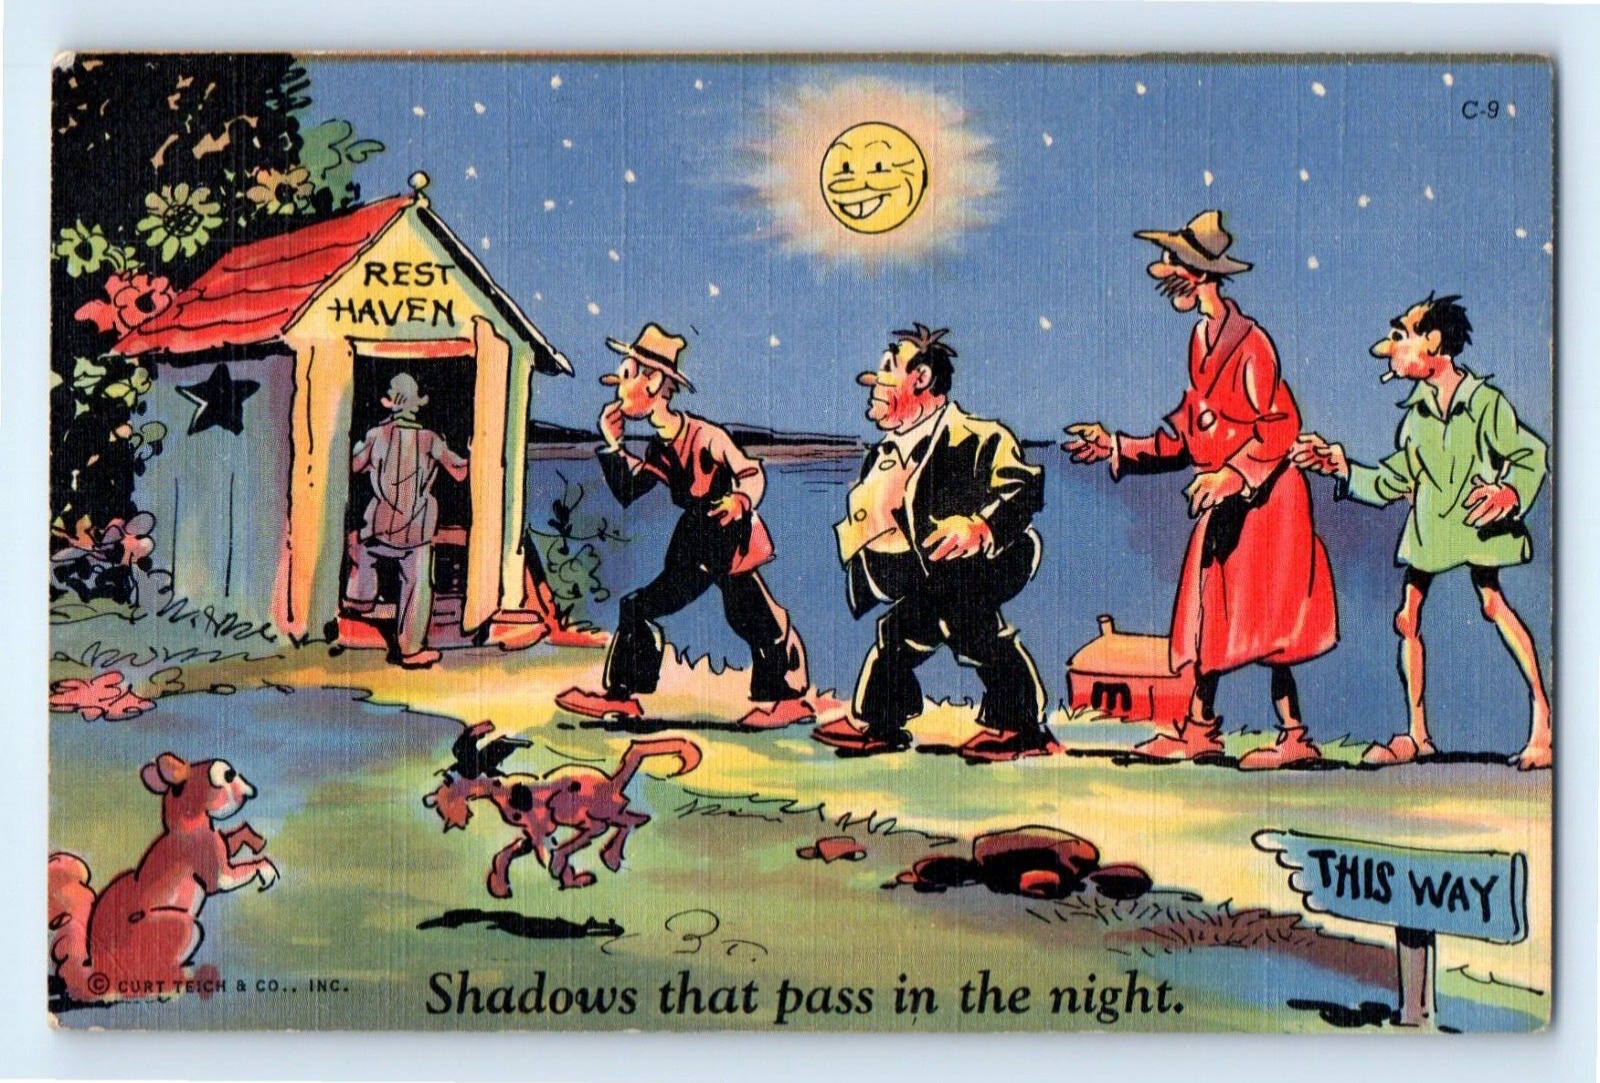 Vintage Comic Postcard “Rest Haven Shadows That Pass in the Night”